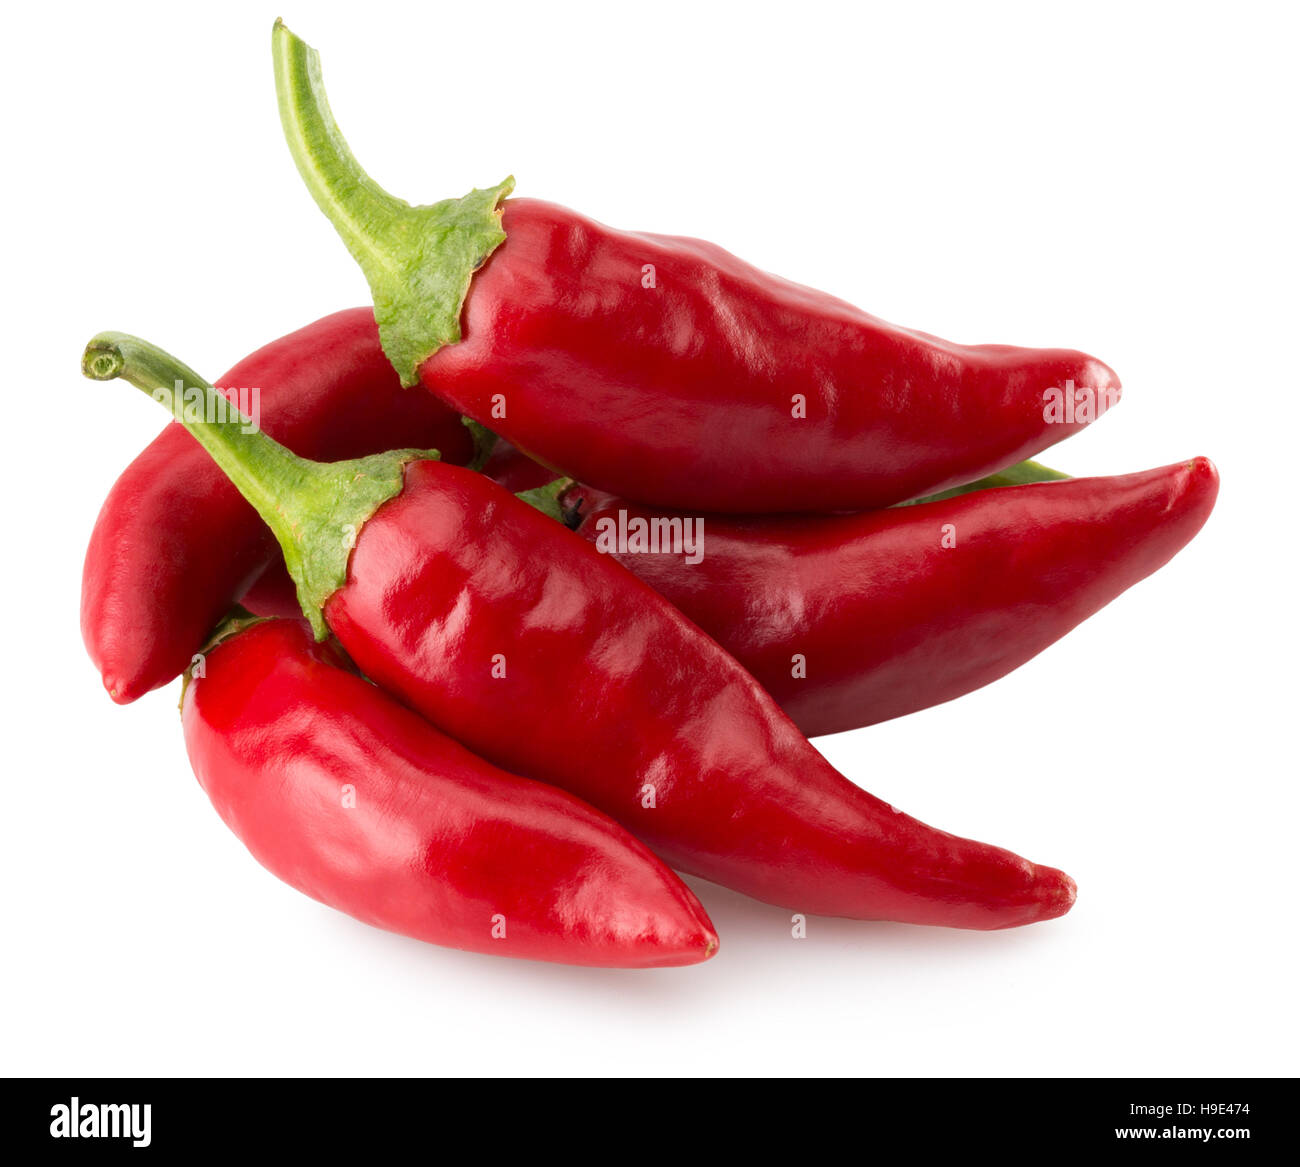 red chili peppers isolated on the white background. Stock Photo